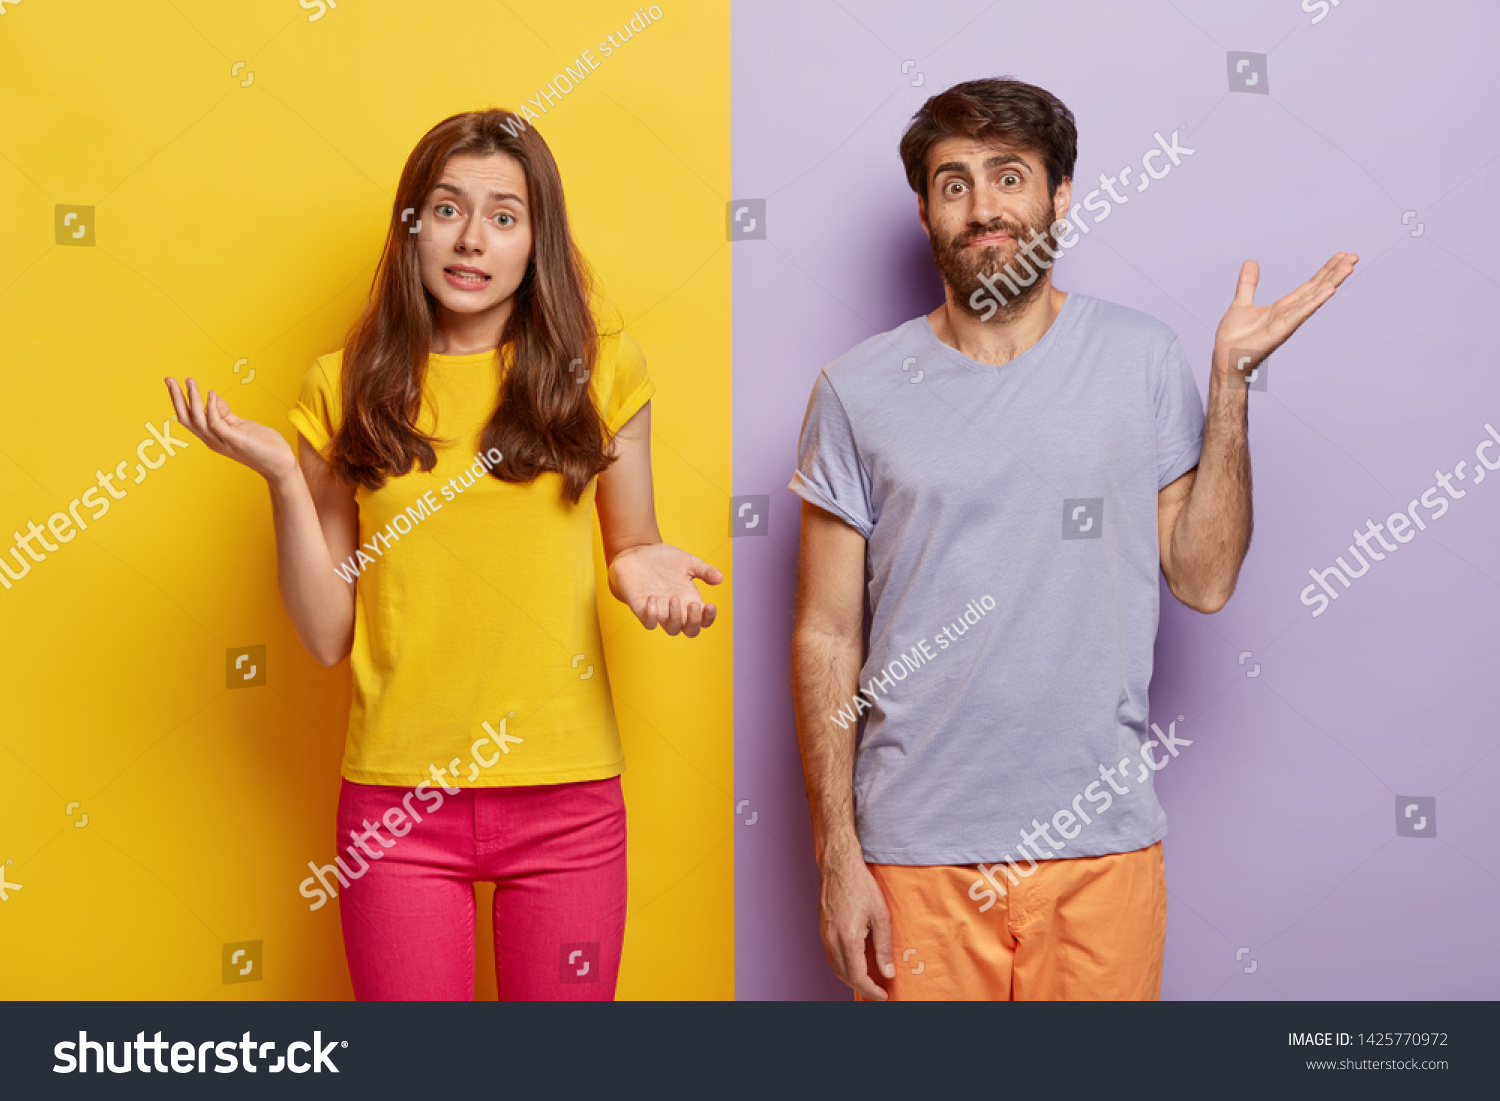 Indifferent unbothered woman and man spread hands sideways, have no idea, dressed in casual outfit, pose against different color background. Confused questioned couple with clueless expression indoor #1425770972